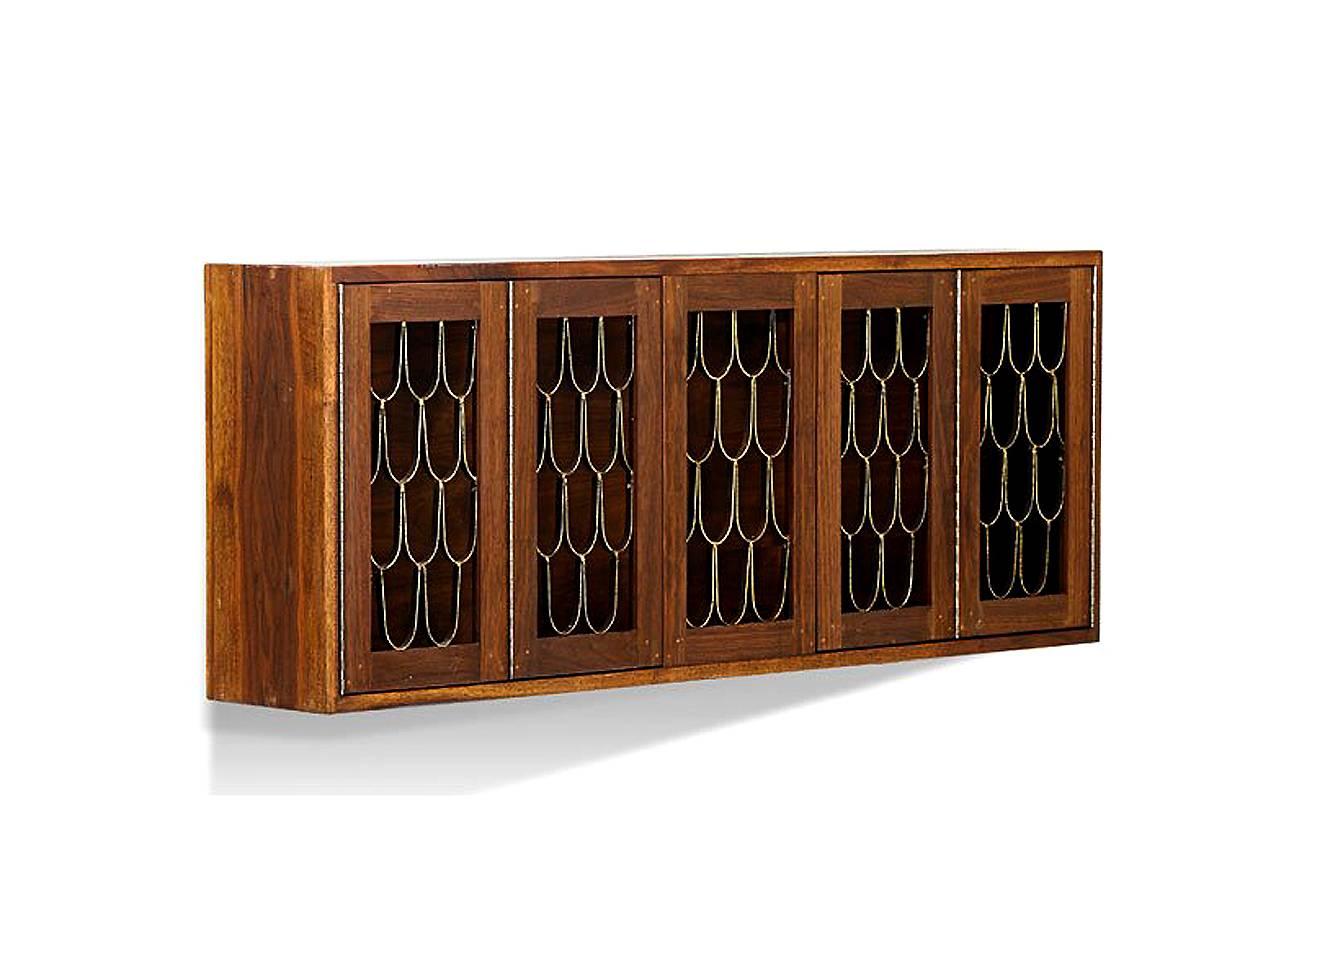 An early wall hanging walnut cabinet crafted in collaboration between Paul Evans (1931 - 1987) and Phillip Lloyd Powell (1919 - 2008) when they shared a studio and showroom in New Hope, PA. The cabinet was among the work dated 1960s when the artists